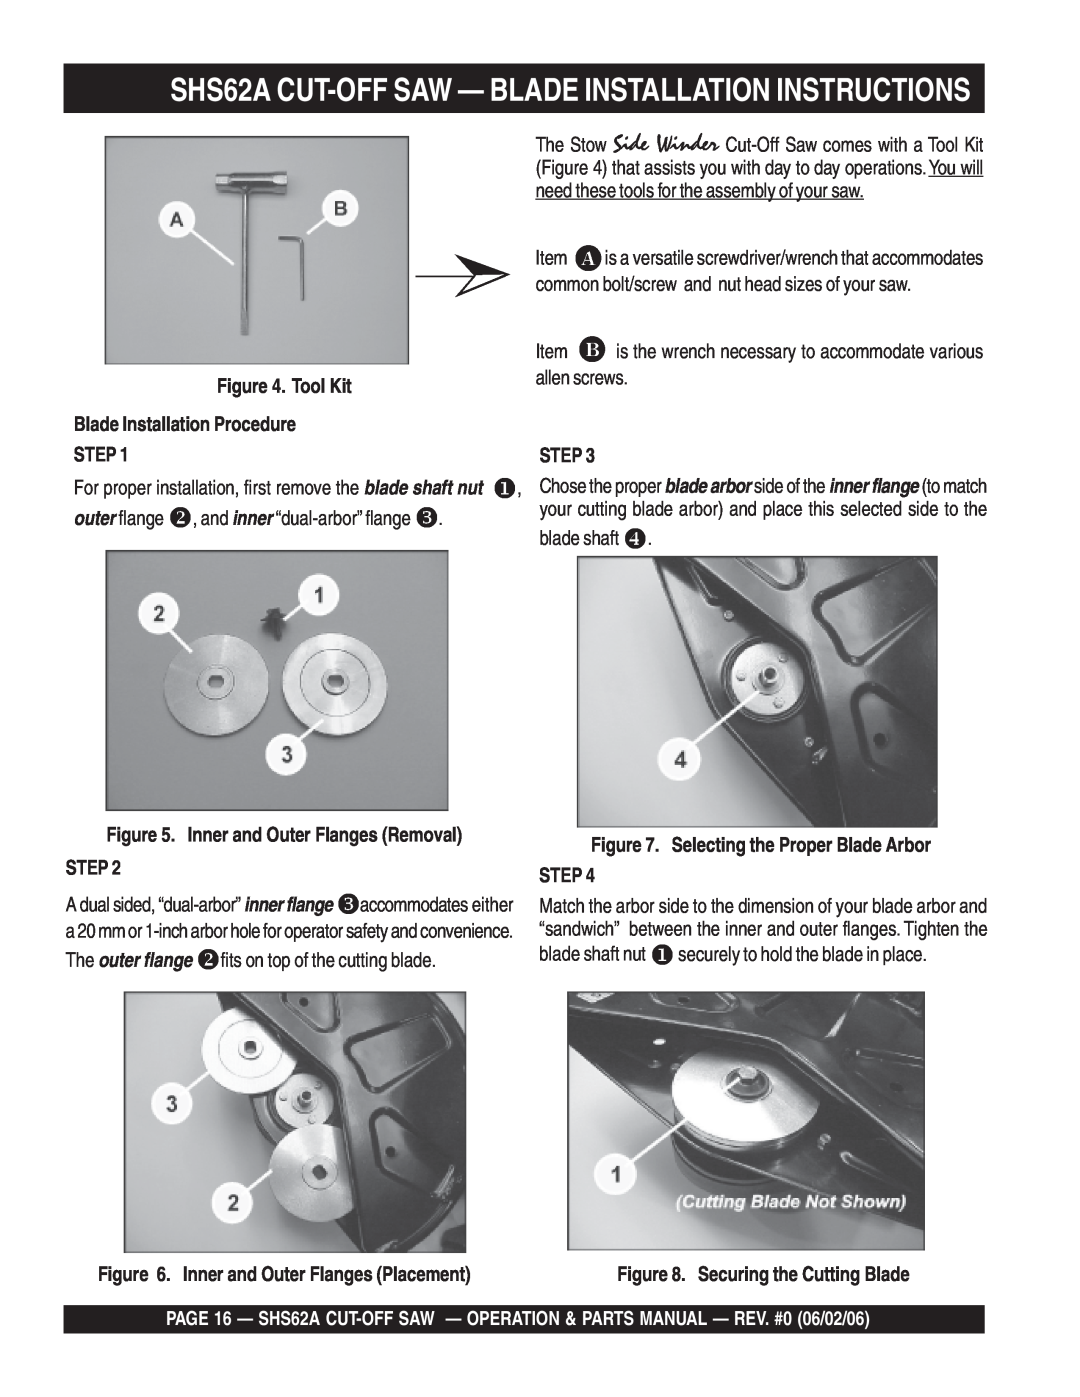 Stow manual SHS62A CUT-OFF SAW - BLADE INSTALLATION INSTRUCTIONS, Tool Kit Blade Installation Procedure STEP, Step 